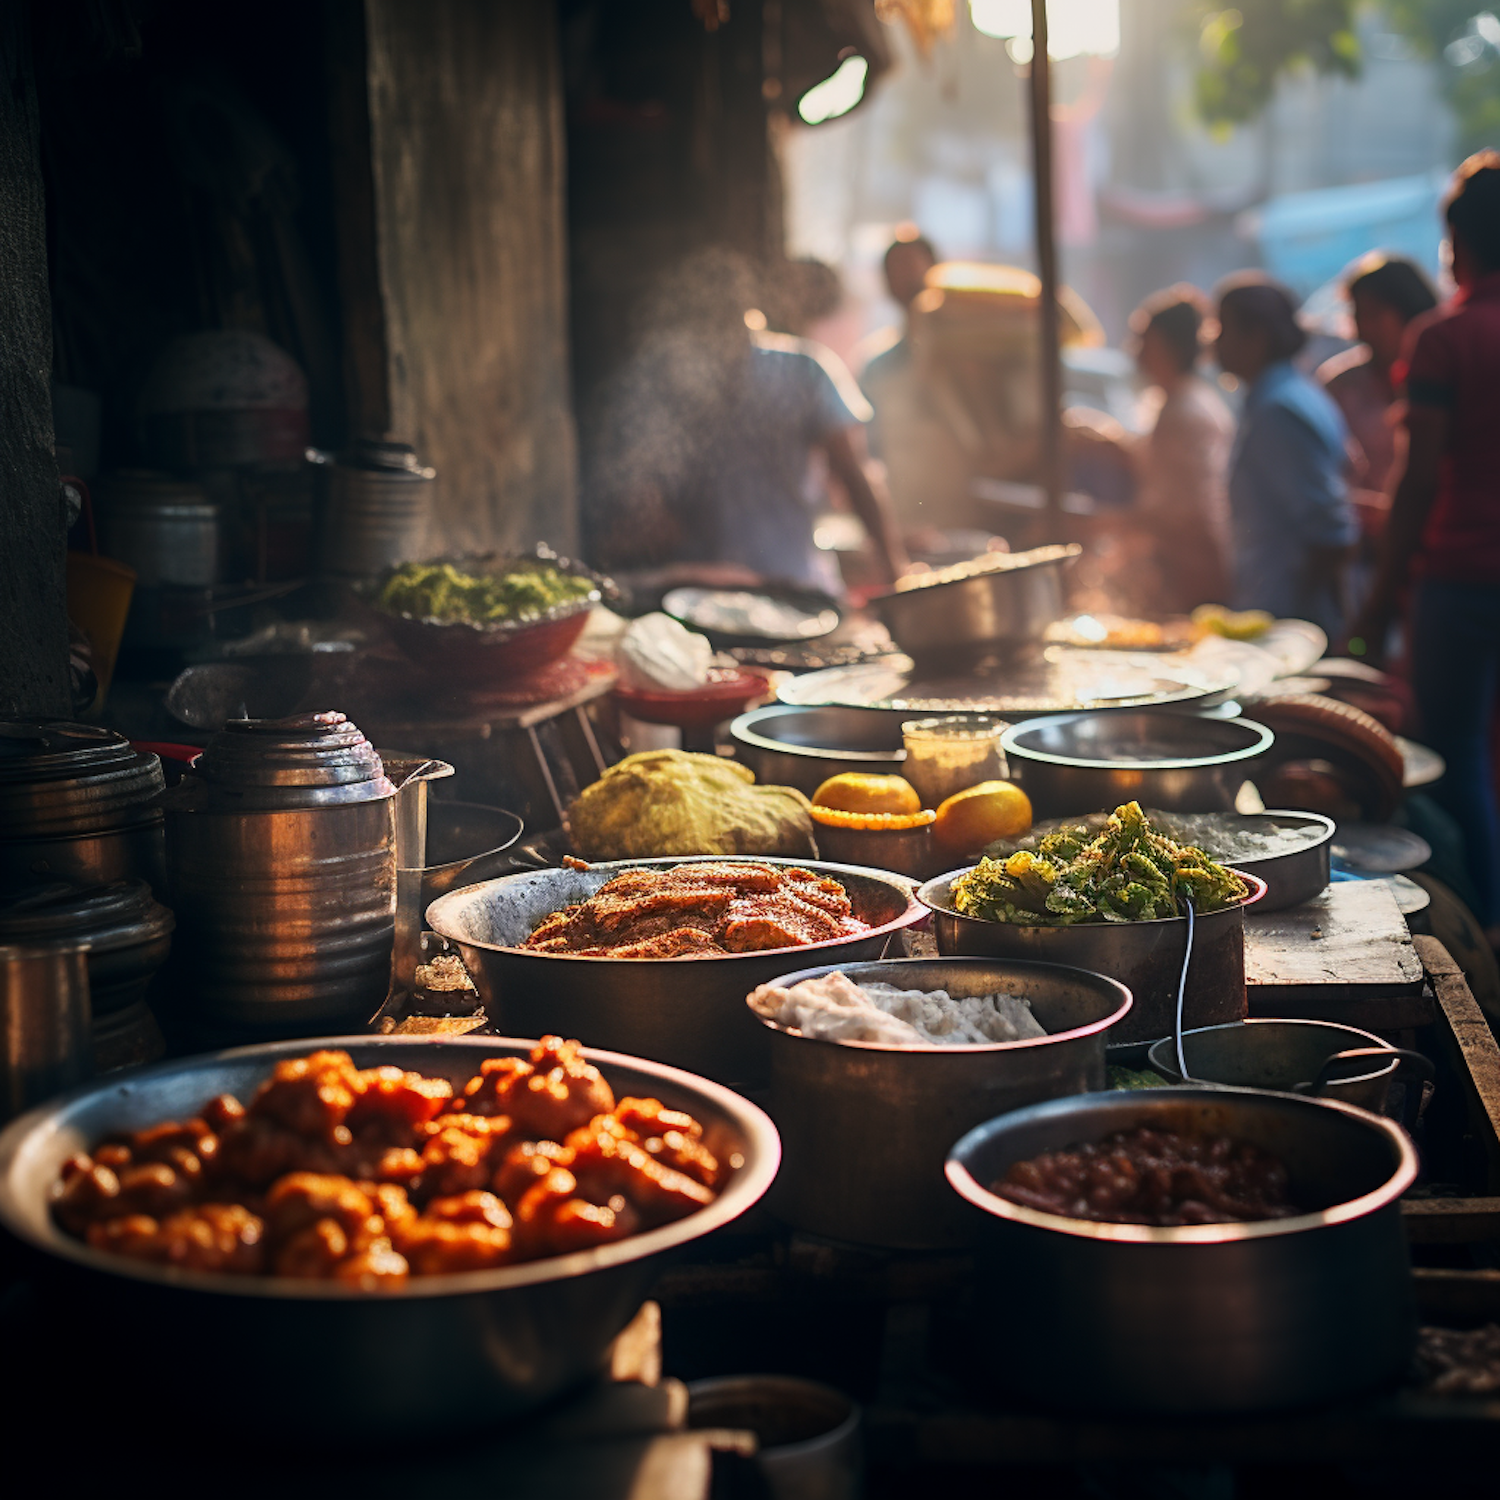 Golden Hour at the Culinary Bazaar